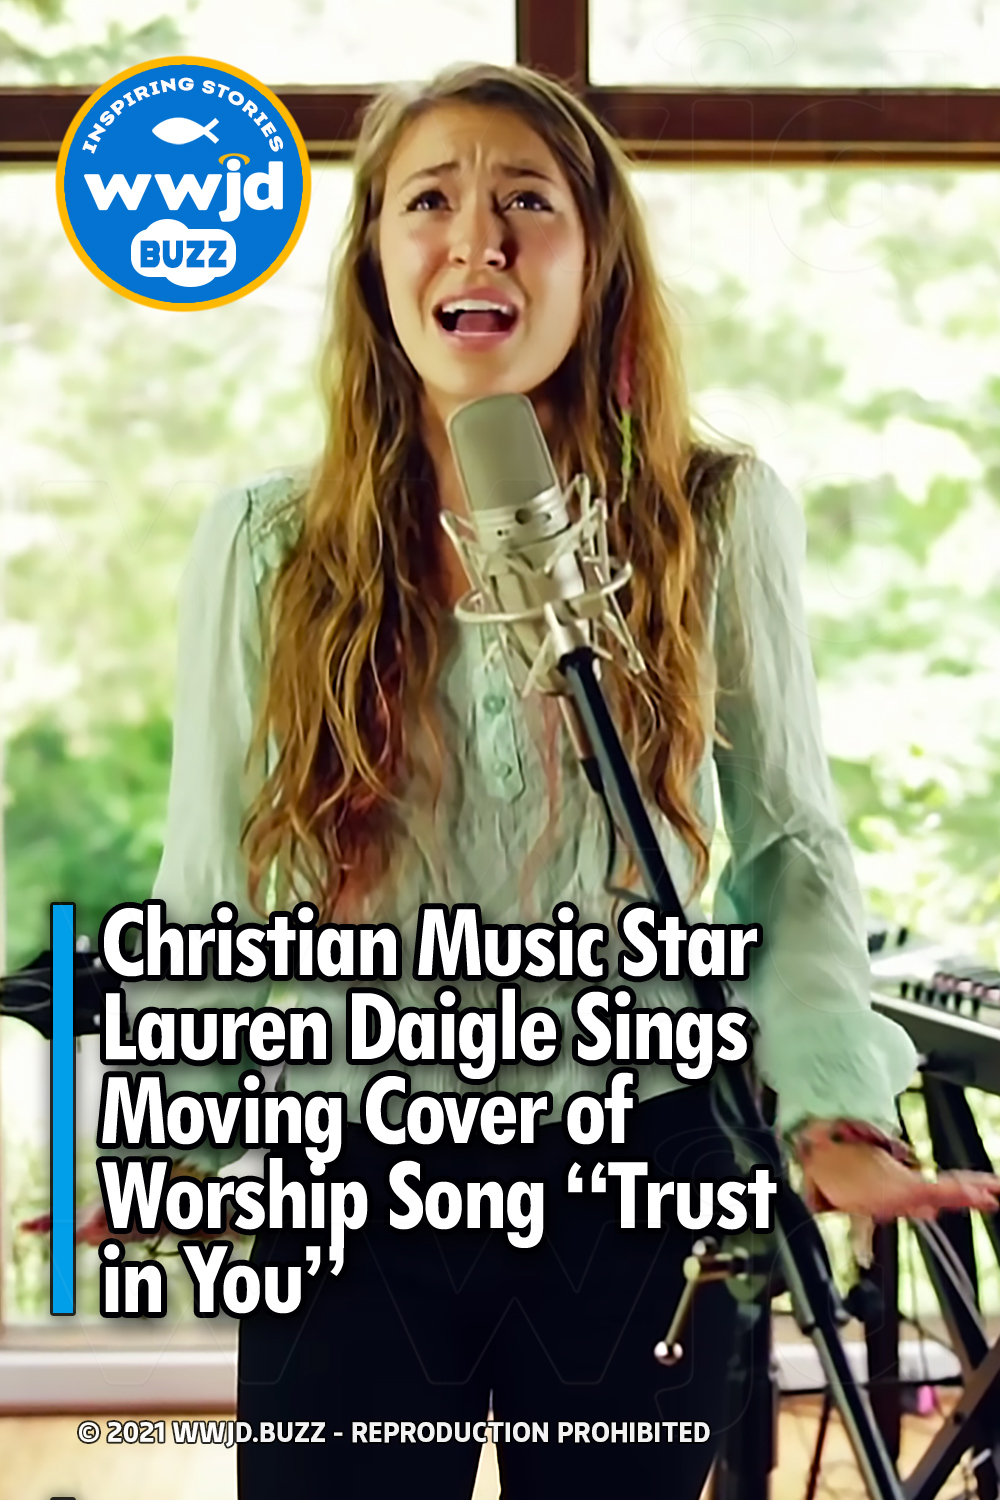 Christian Music Star Lauren Daigle Sings Moving Cover of Worship Song “Trust in You”